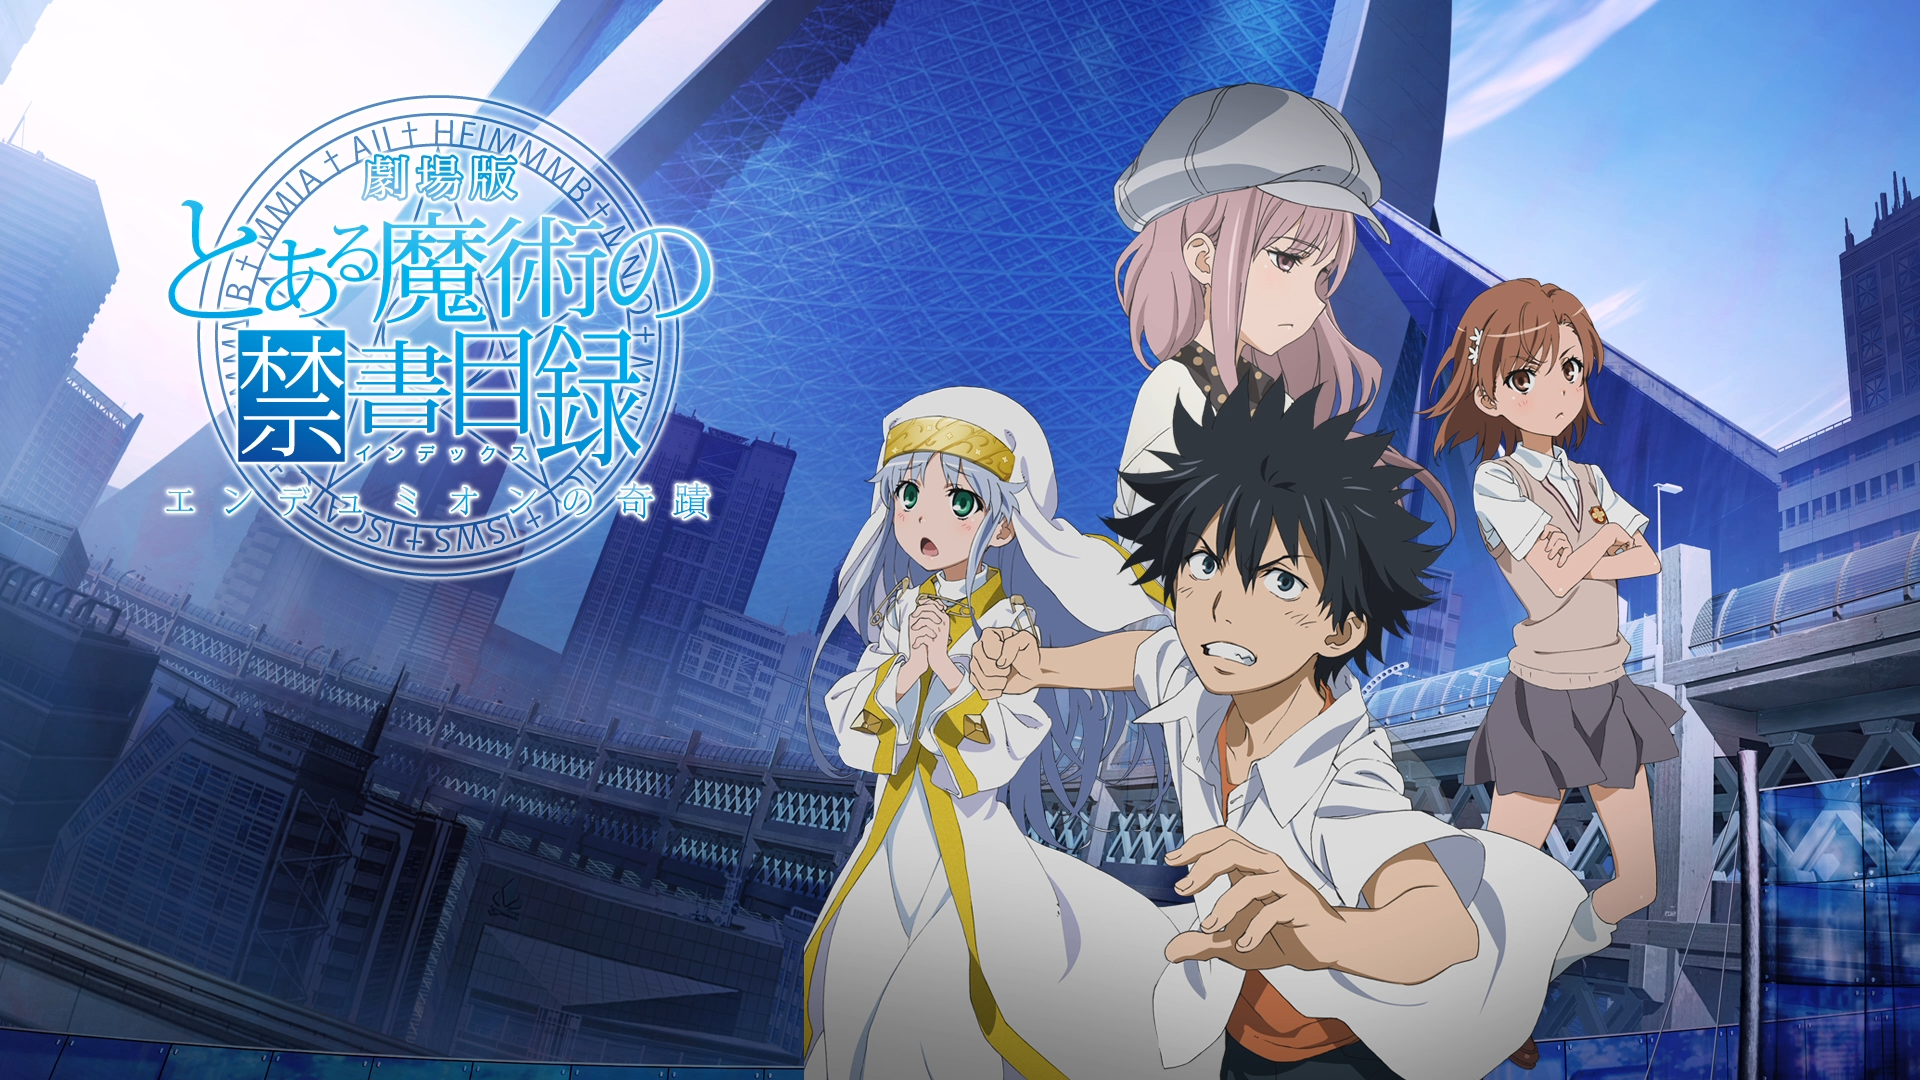 A Certain Magical Index HD Wallpaper Background Image 1920x1080.